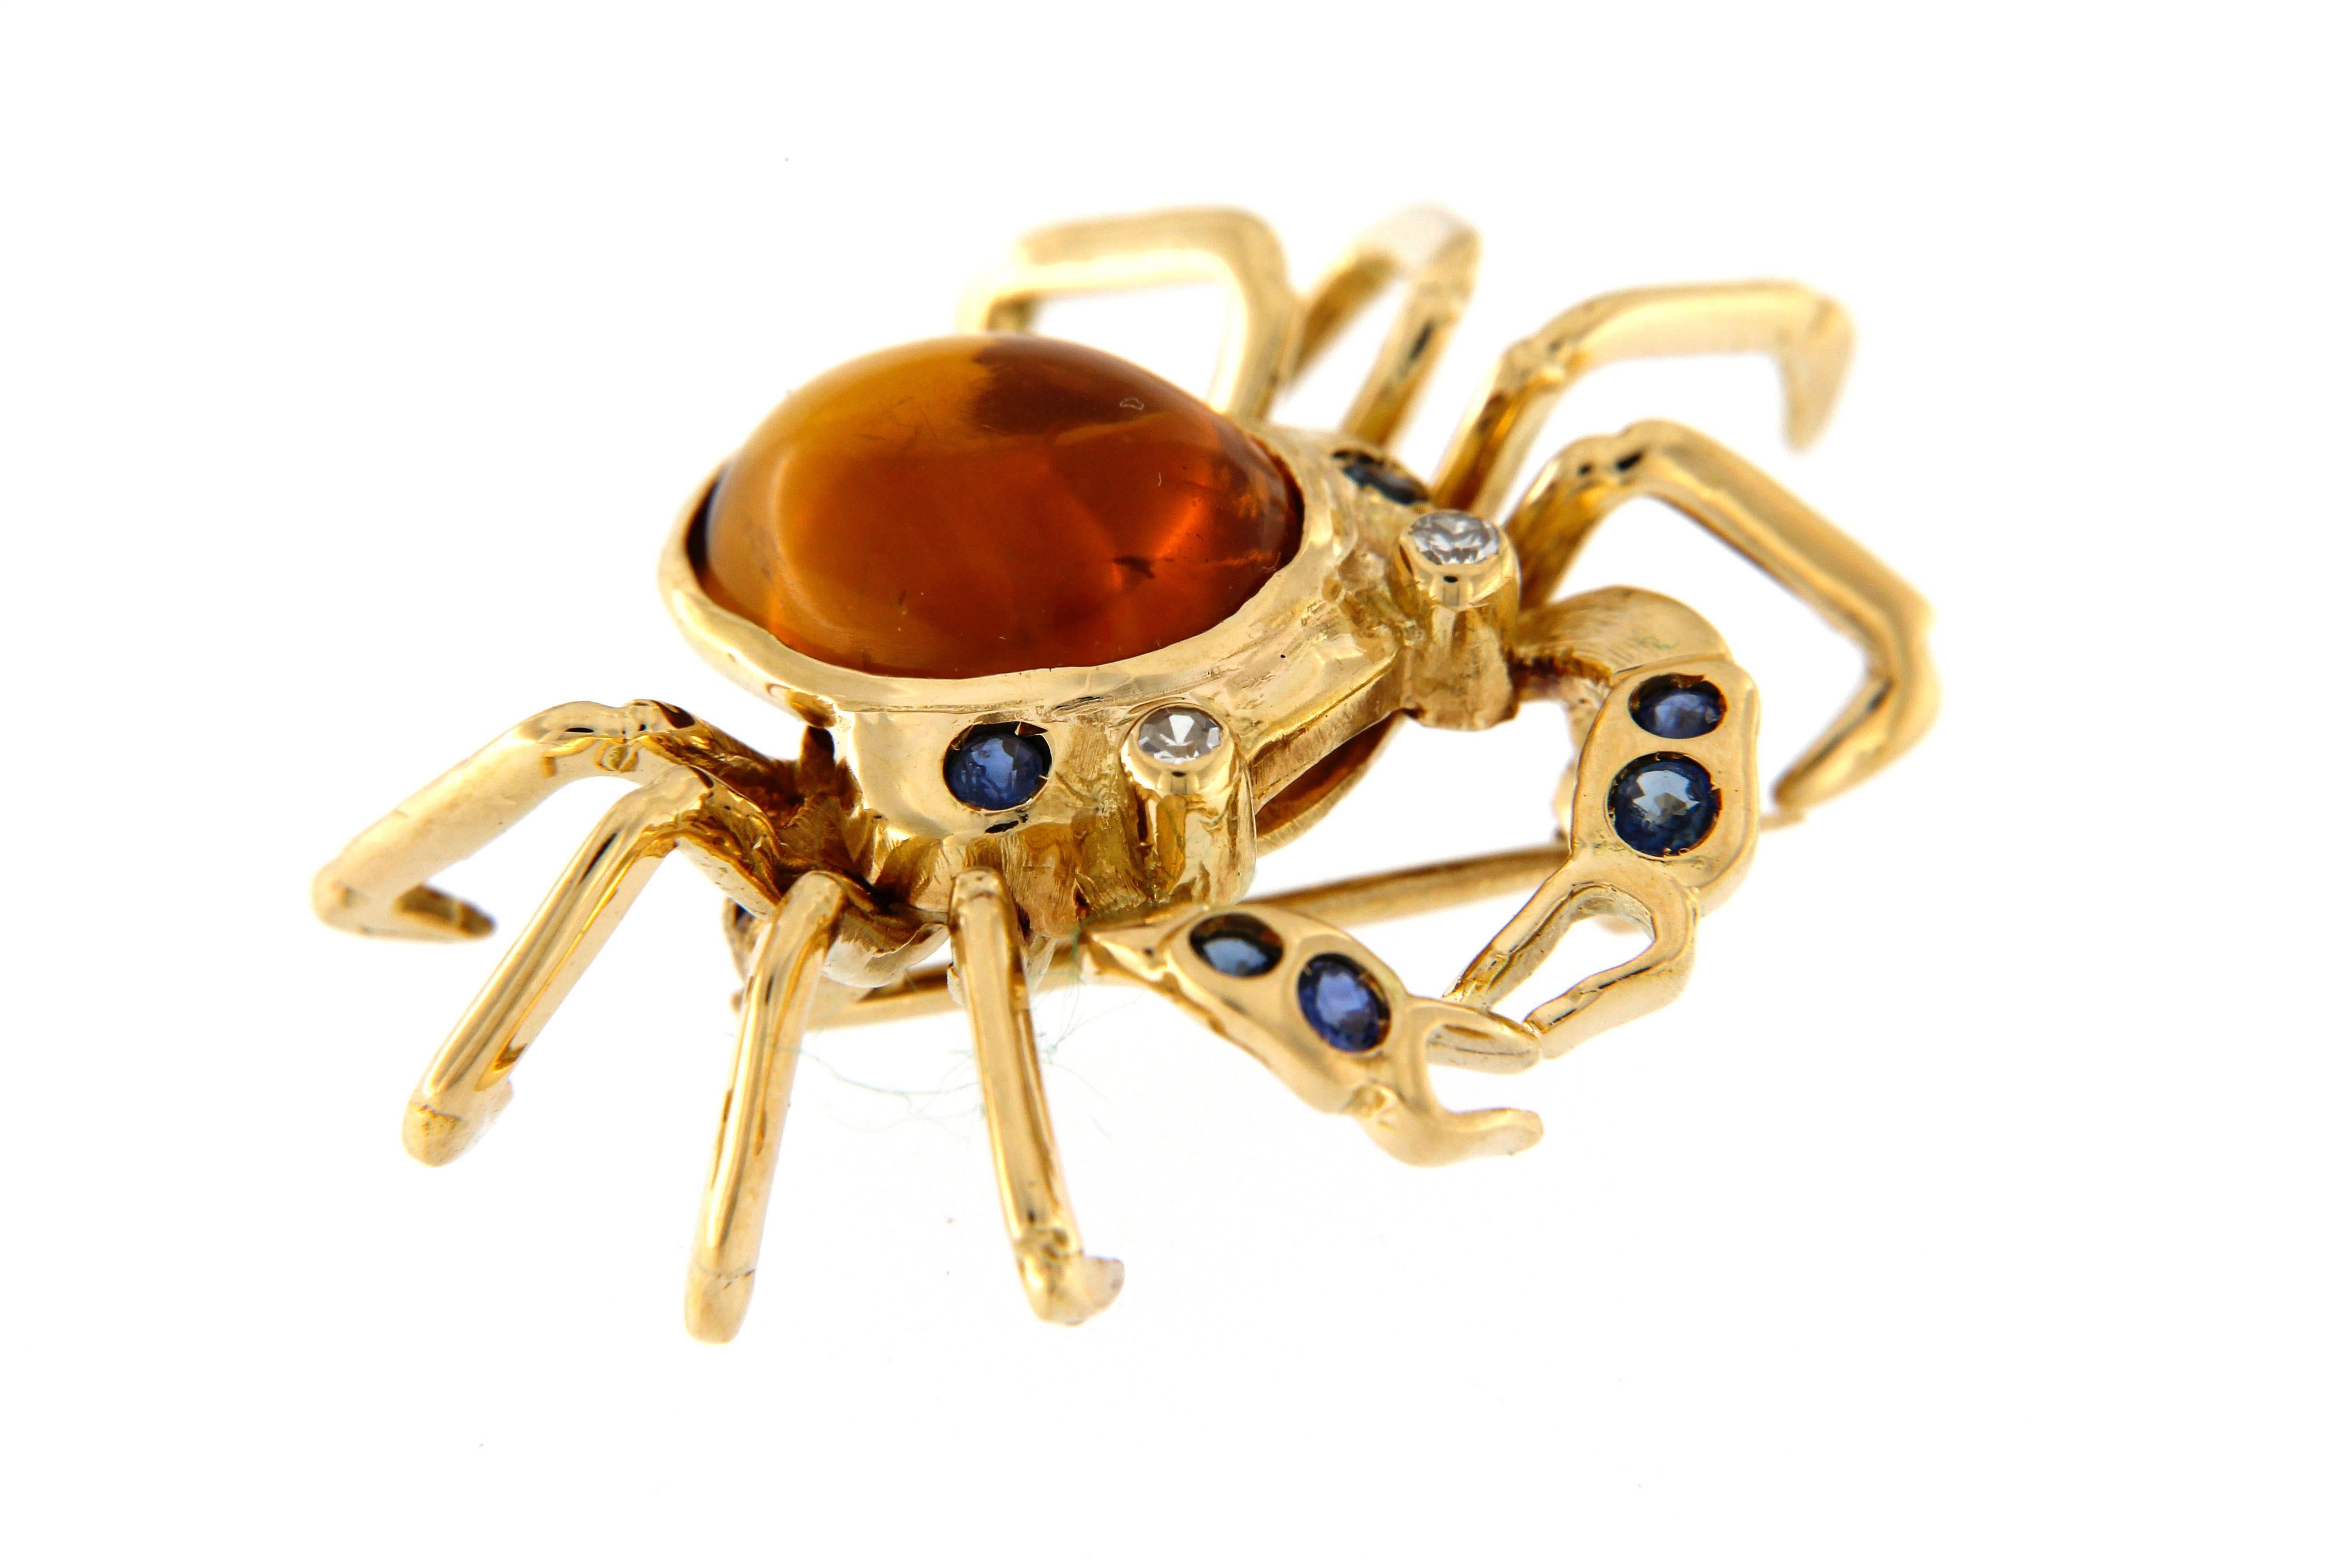 Modern Crab Brooche with Topaze